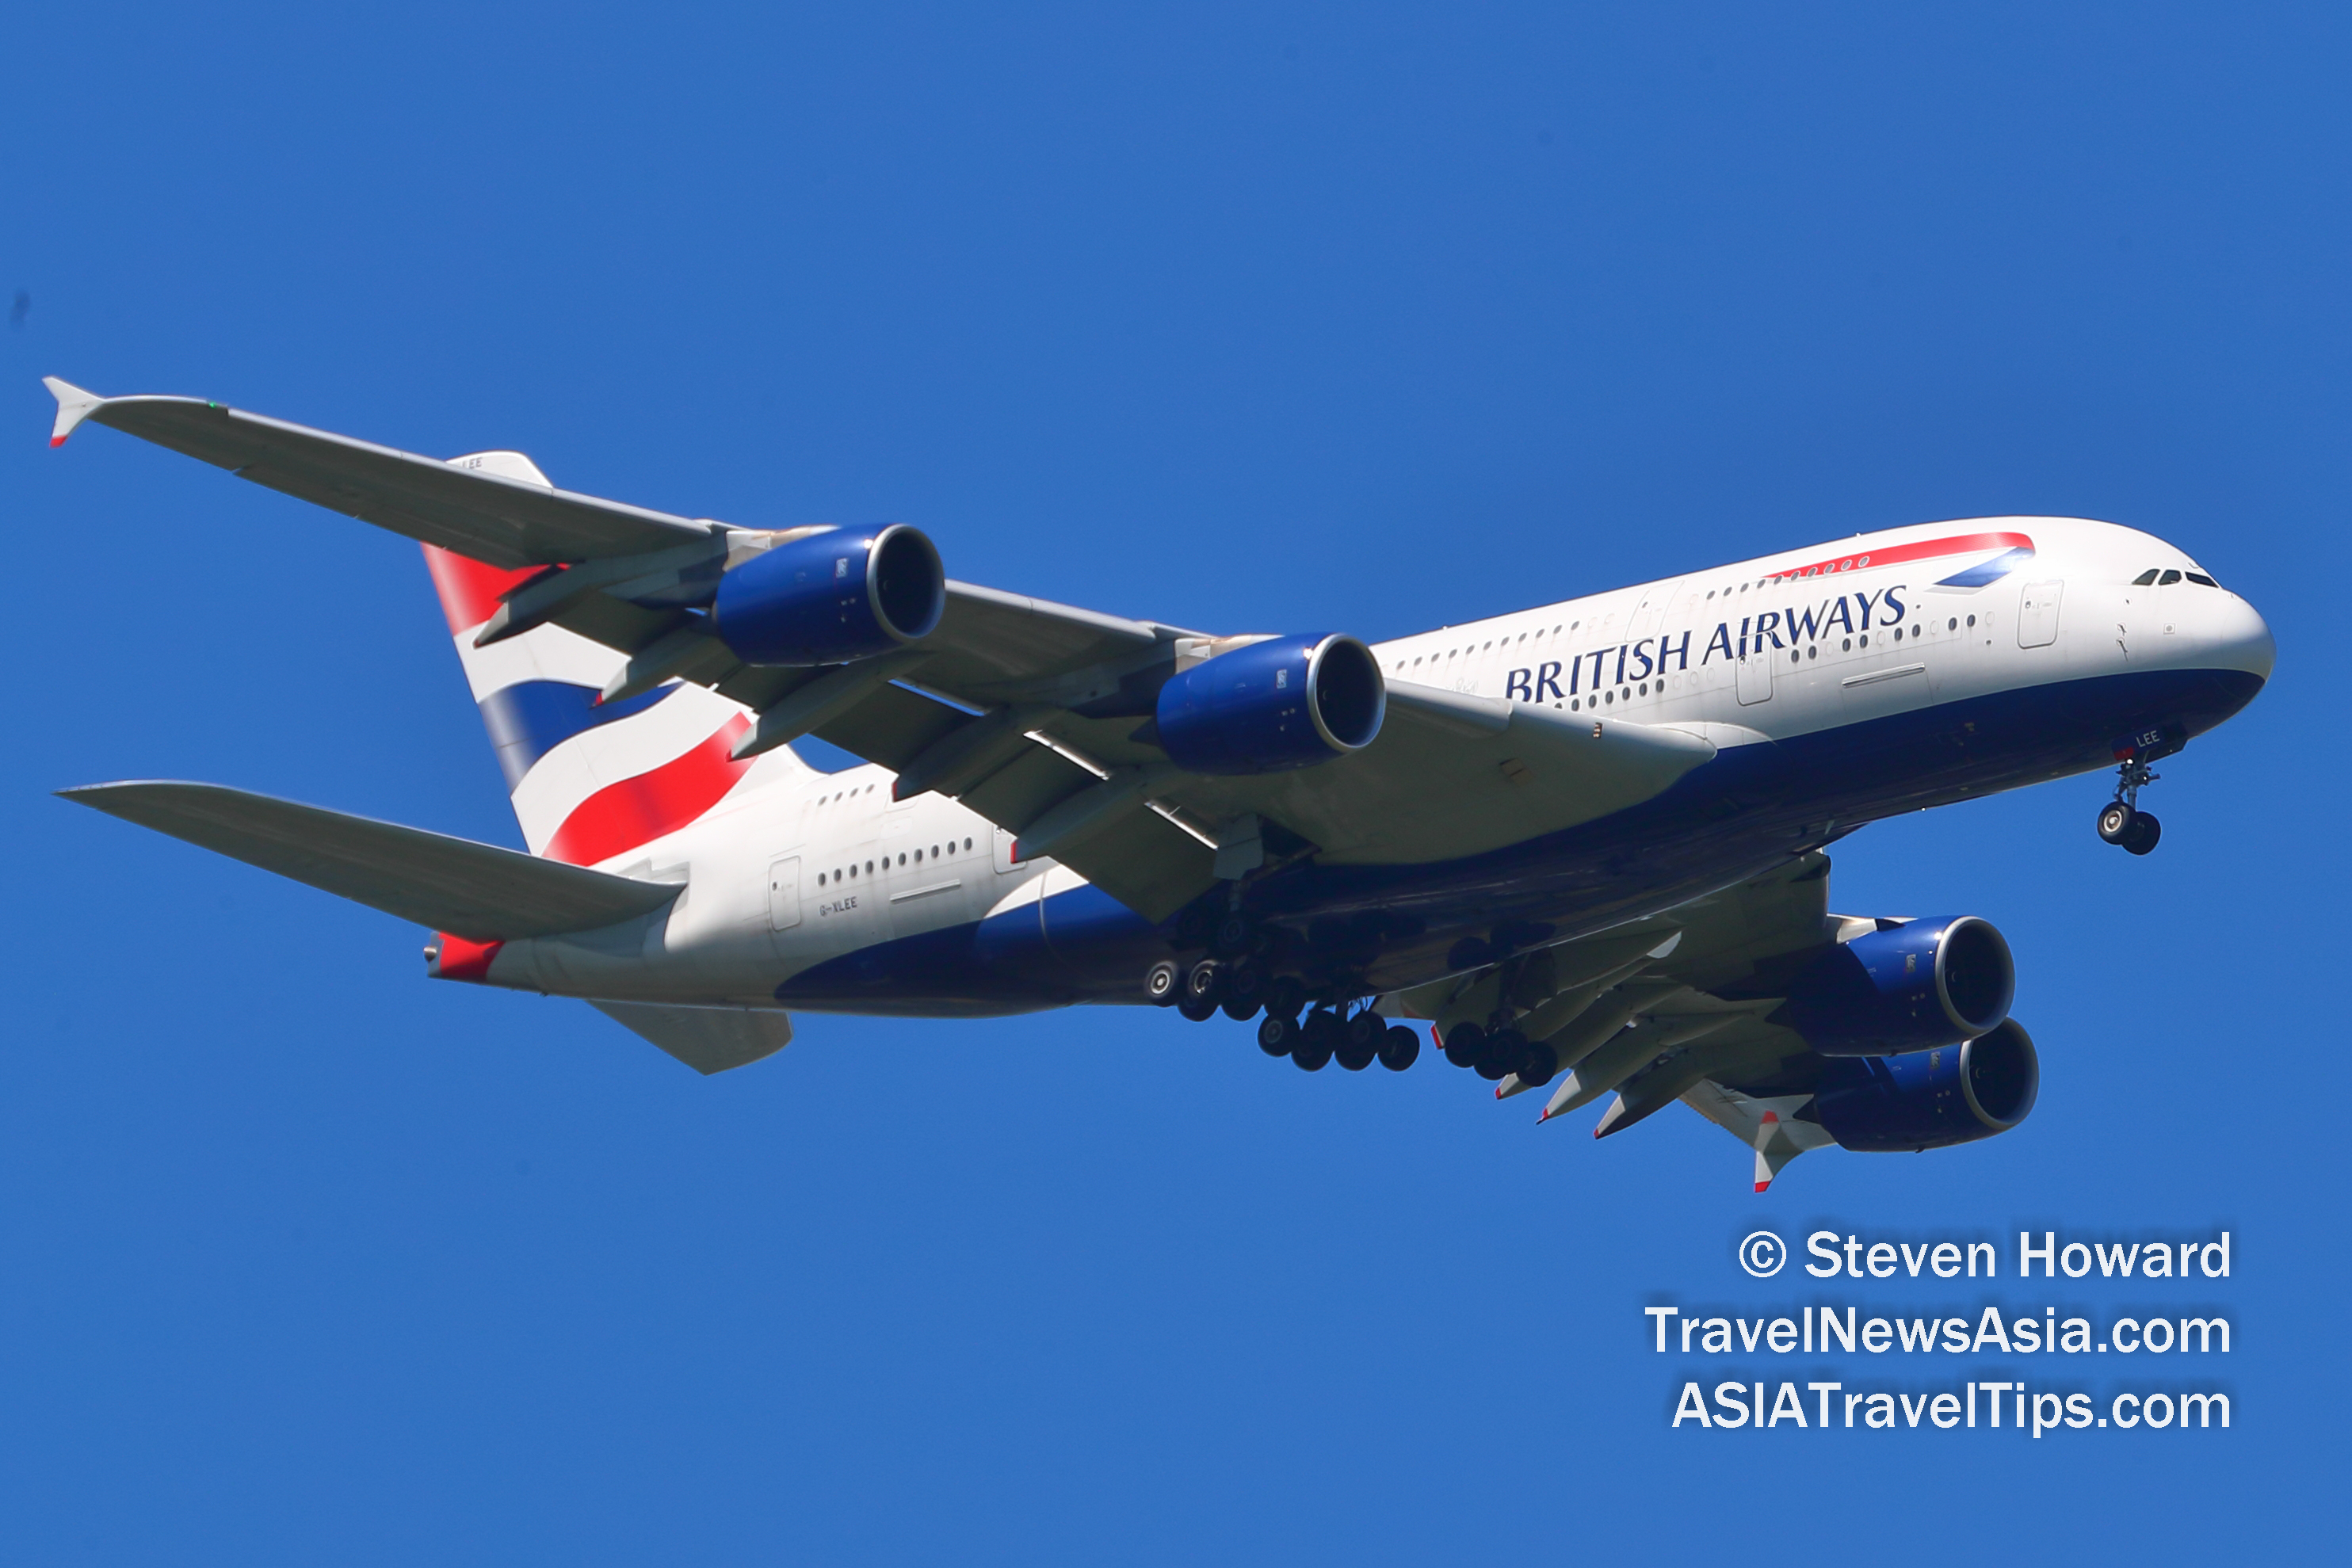 British Airways Airbus A380 reg: G-XLEE. Picture by Steven Howard of TravelNewsAsia.com on 4 July 2019. Click to enlarge.